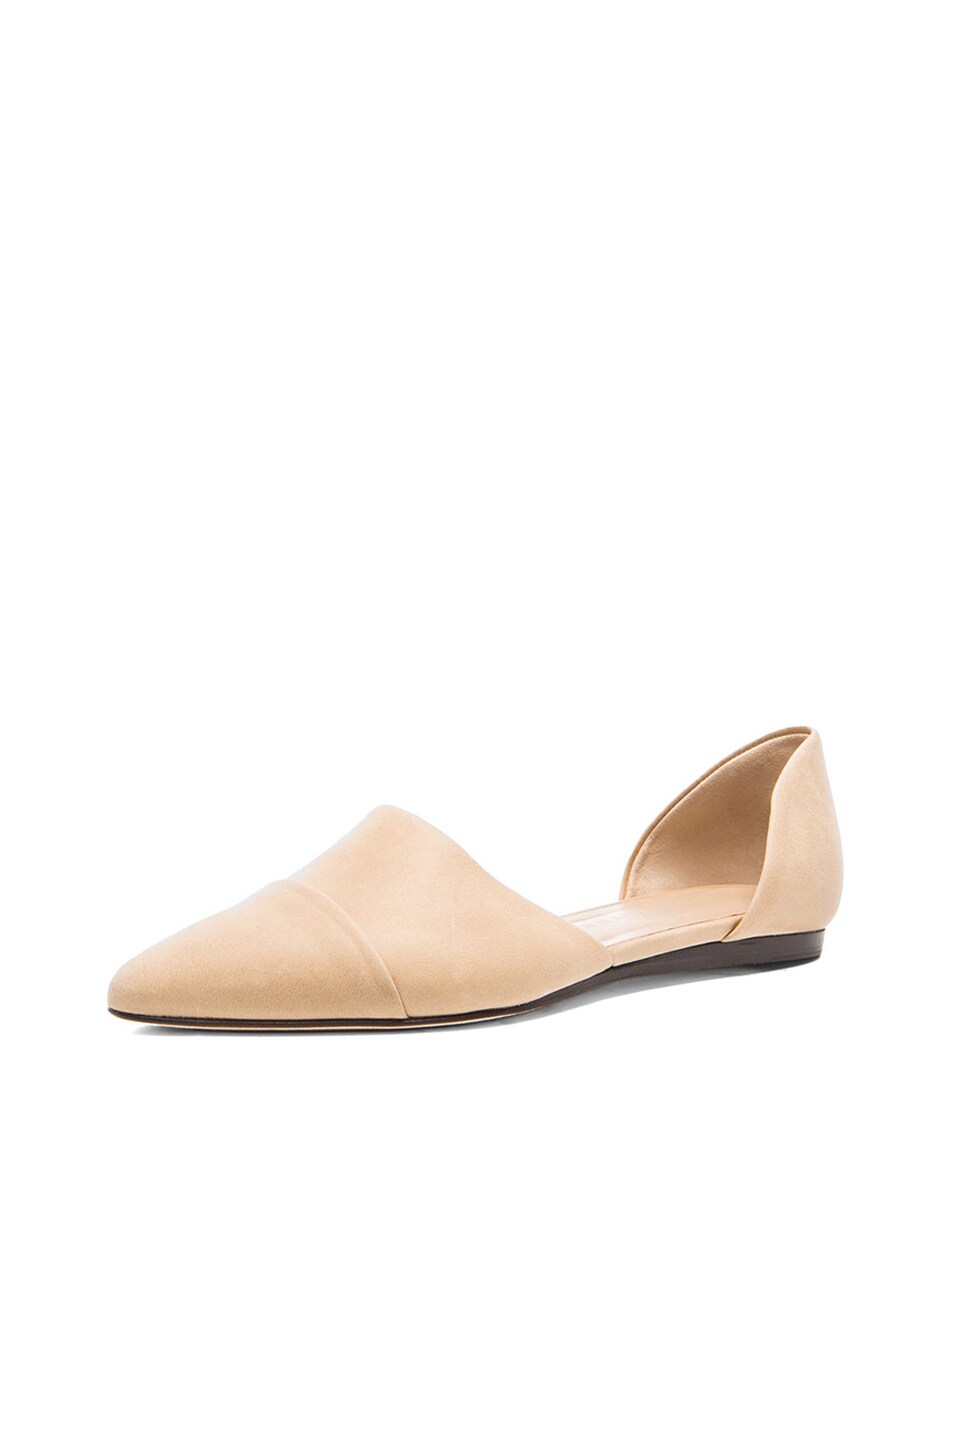 Jenni Kayne D'Orsay Oiled Leather Flats in Natural | FWRD